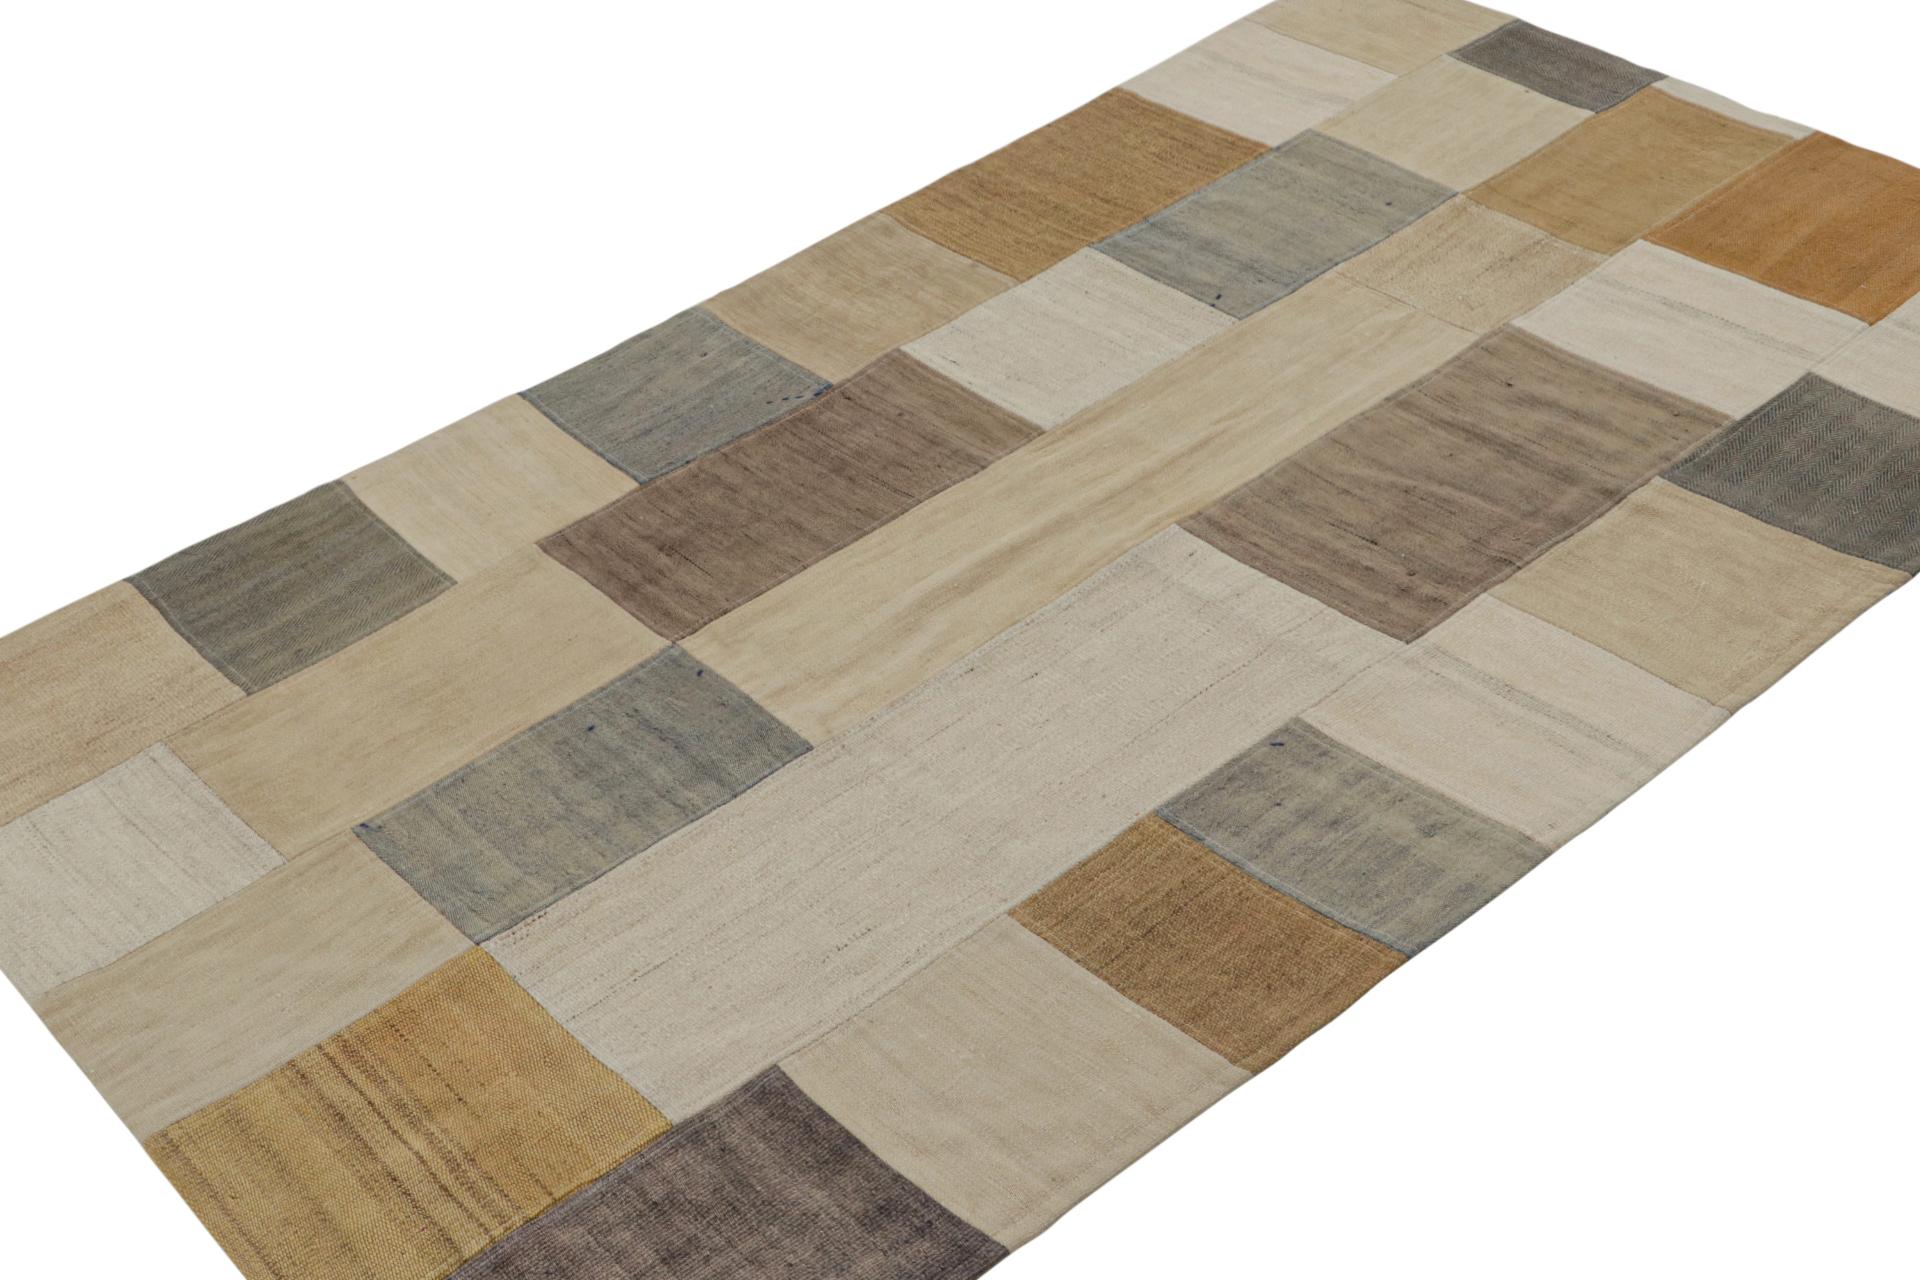 Hand woven in a wool flat weave utilizing vintage yarns, this 4x6 modern Kilim rug from Rug & Kilim’s Patchwork Kilim rug collection marries inspiration from mid-century flat weave rugs with a whimsical spectrum of beige/brown, blue and gray. 

On